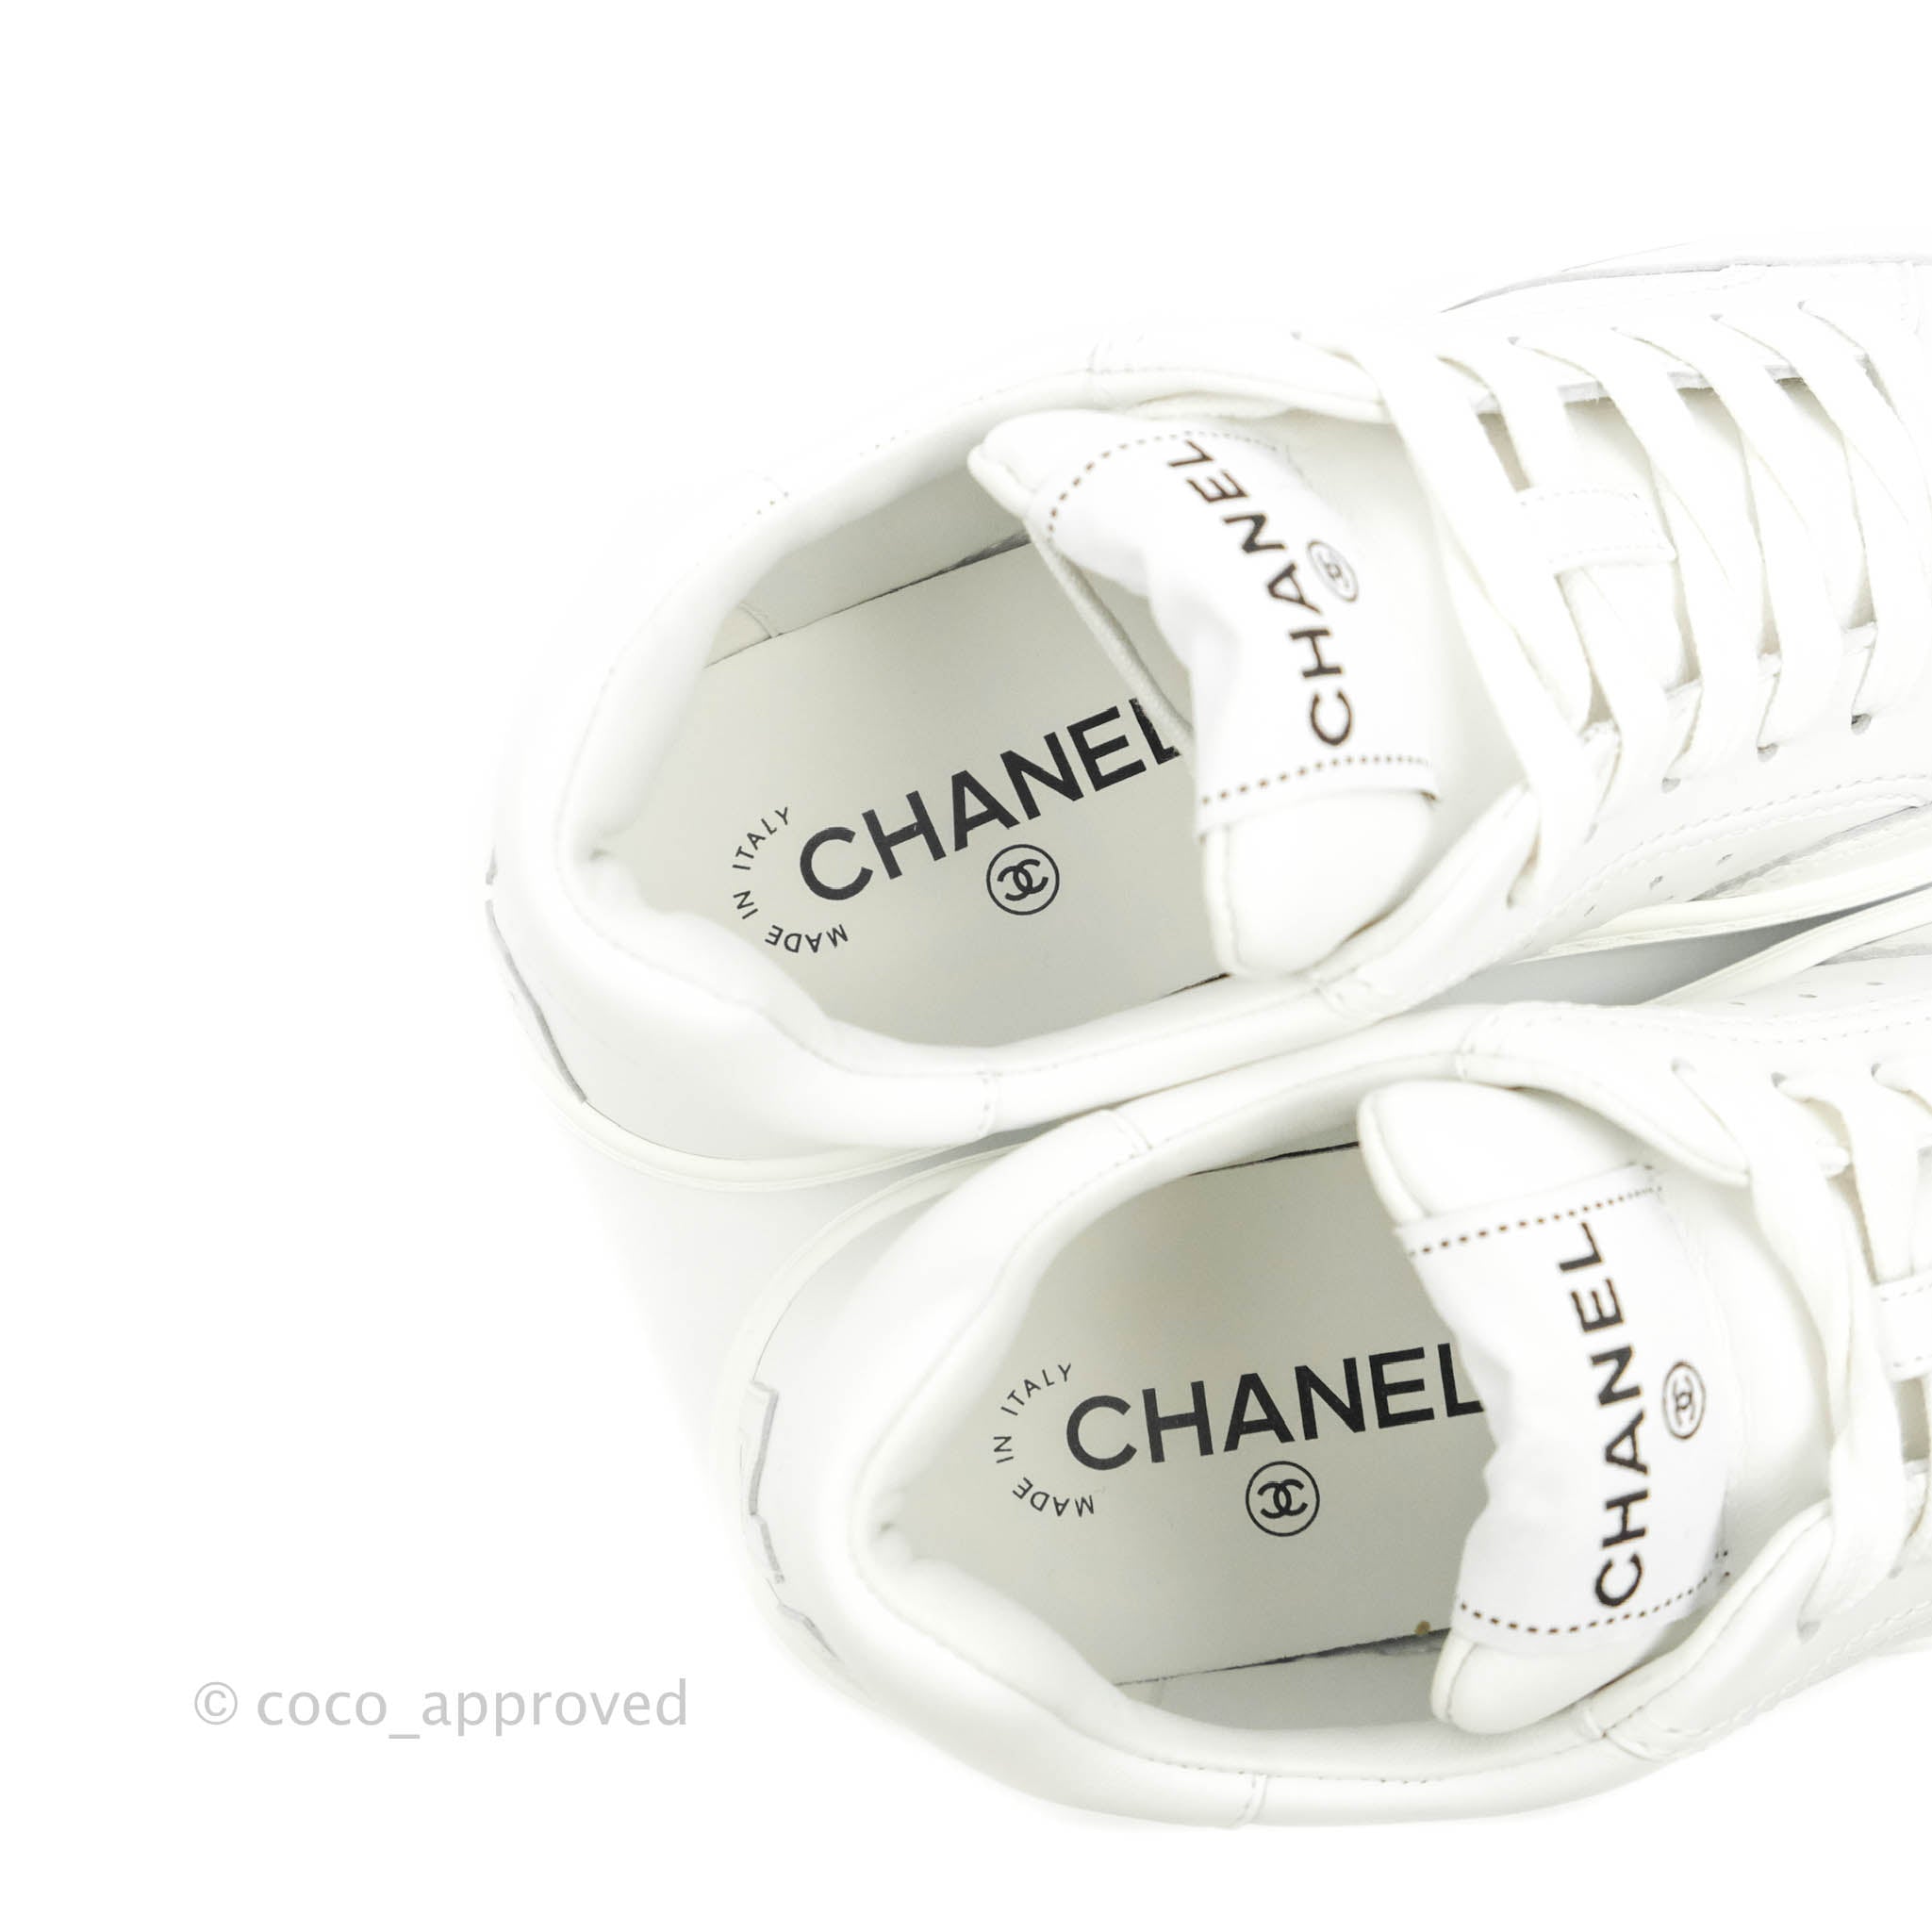 Chanel Calfskin Logo Sneakers White Size 37.5 – Coco Approved Studio